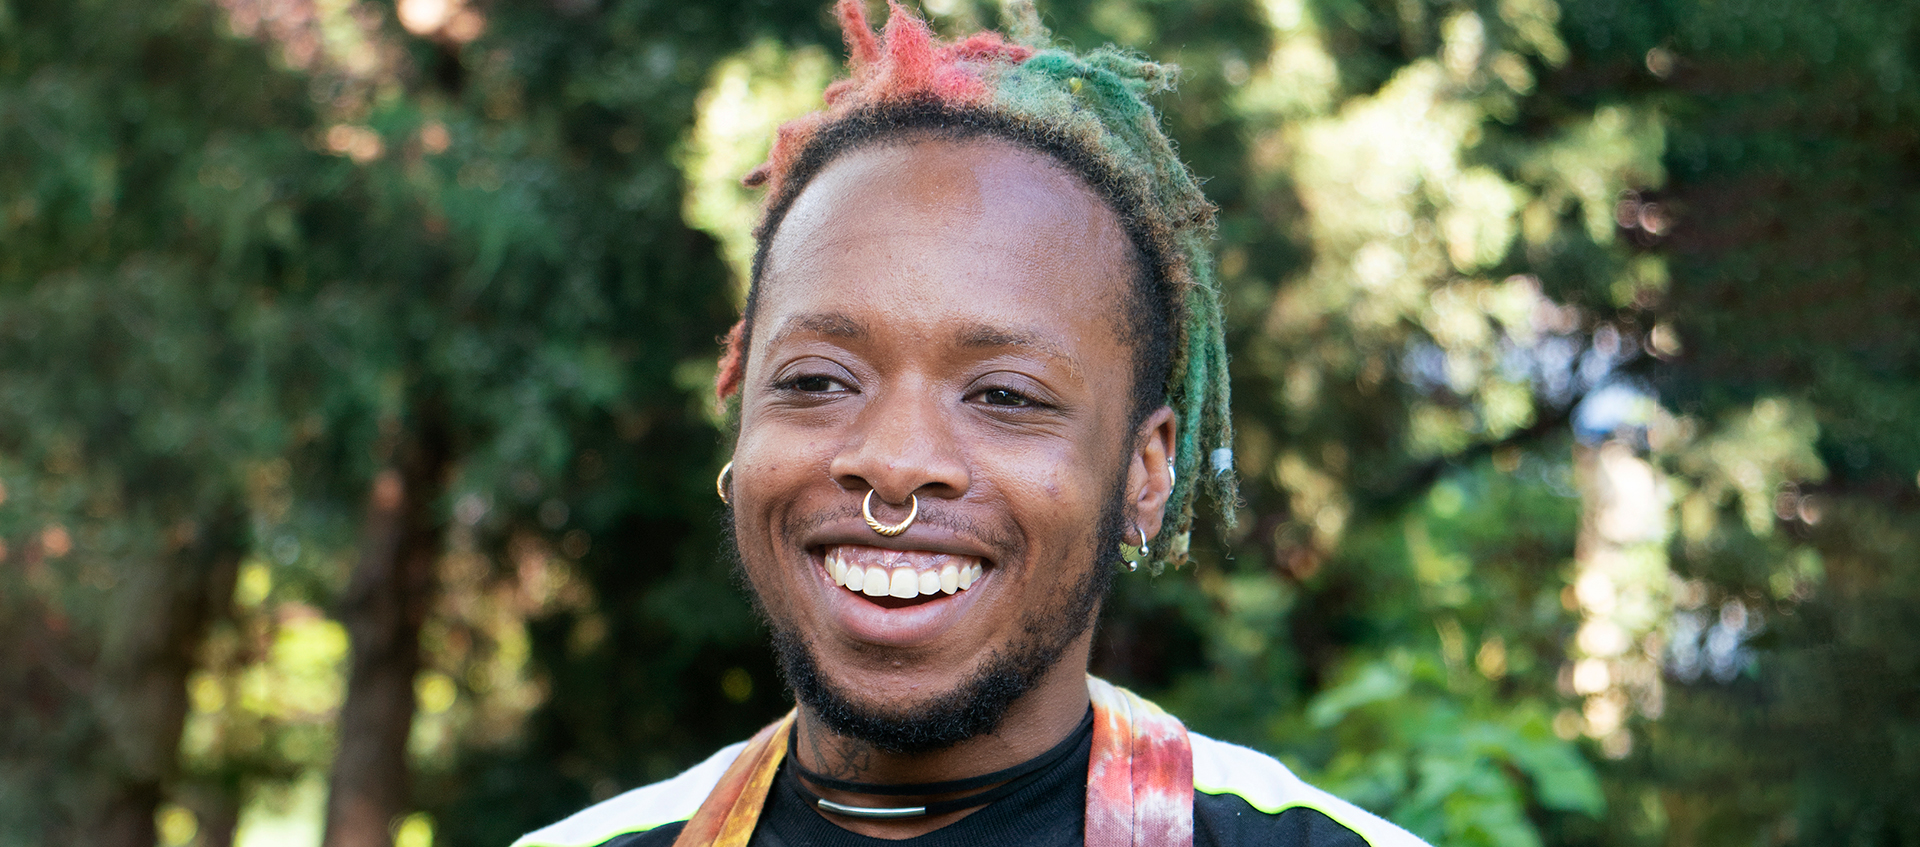 Anaïs Duplan smiles against a backdrop of trees. He has medium brown skin; short, red and green locs; black facial hair; and a septum and ear piercings.